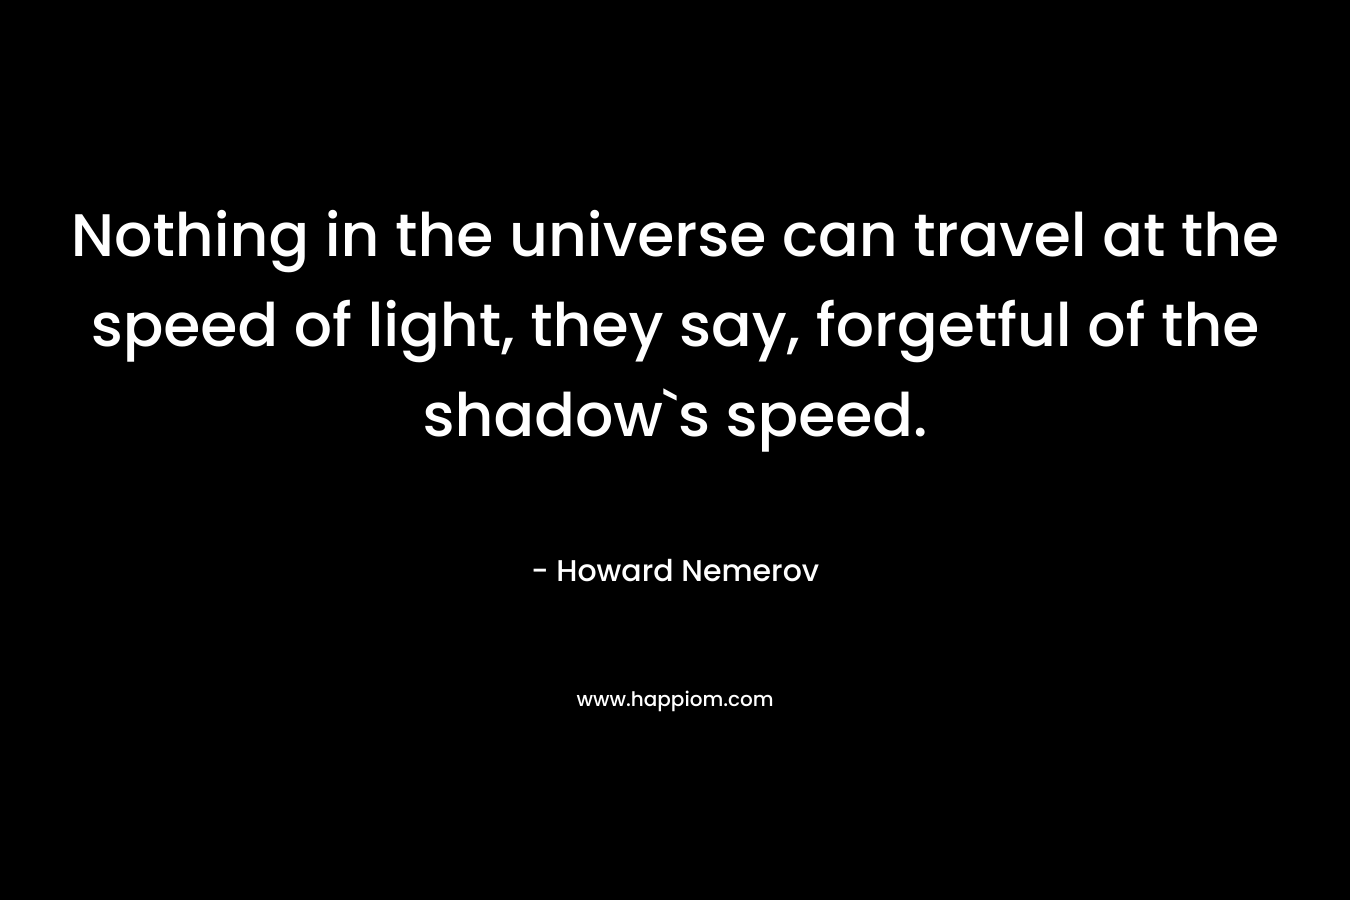 Nothing in the universe can travel at the speed of light, they say, forgetful of the shadow`s speed.